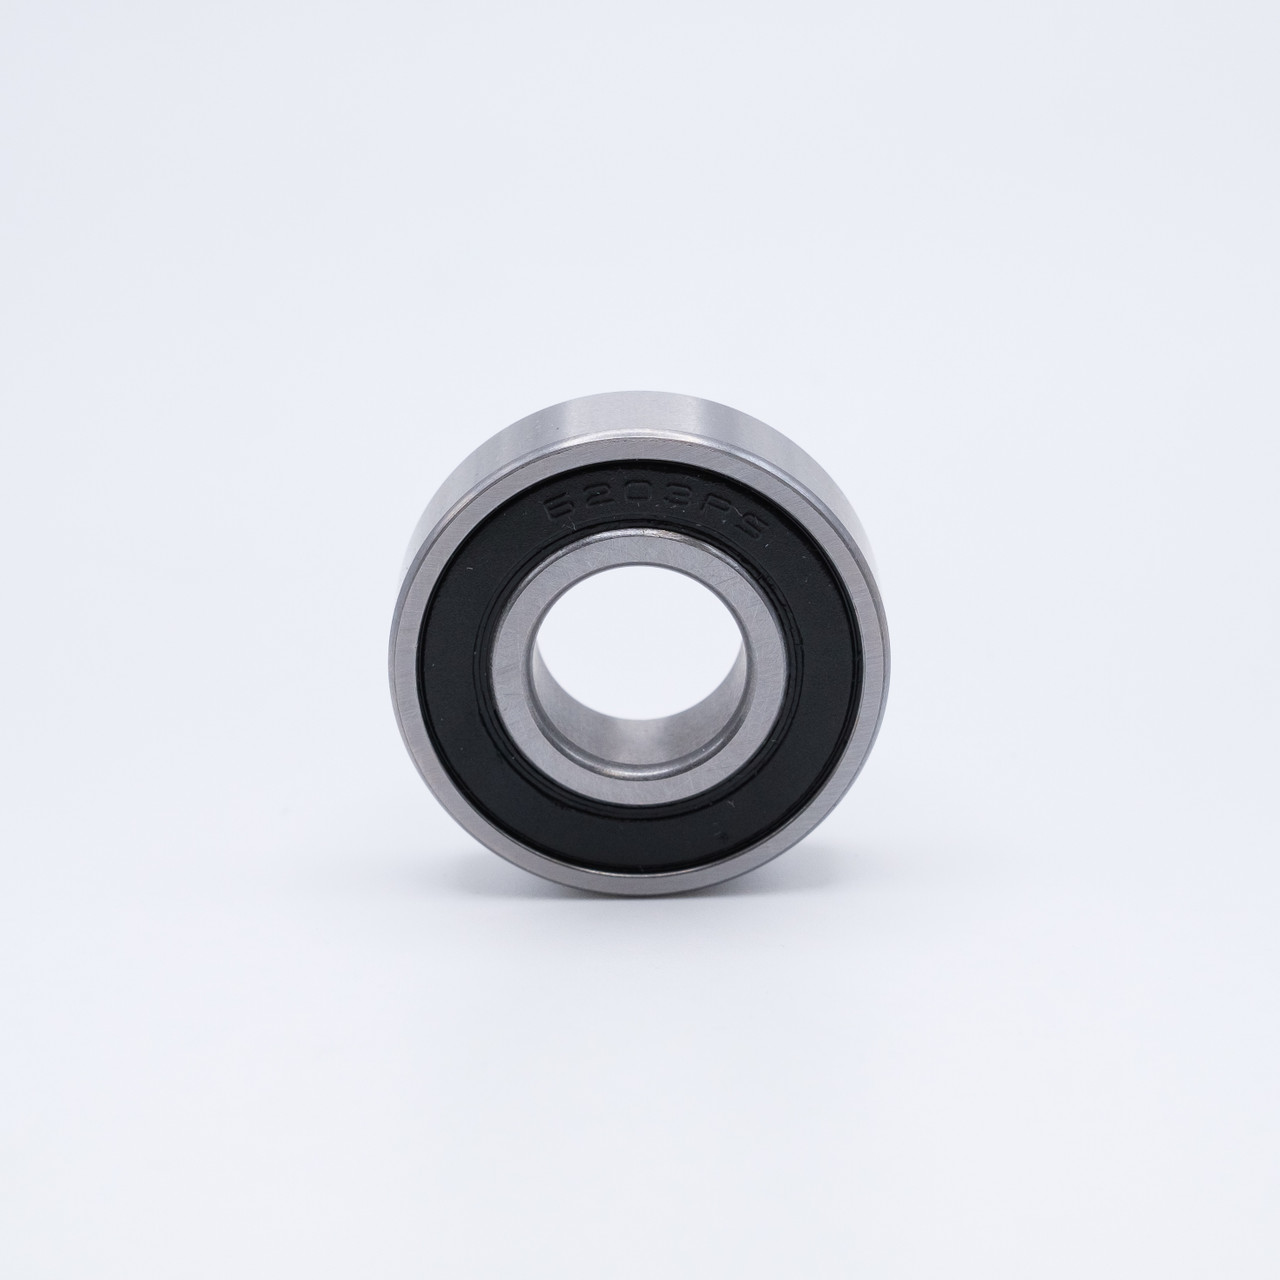 S6203-2RS Stainless Ball Bearing 17x40x12 Front View